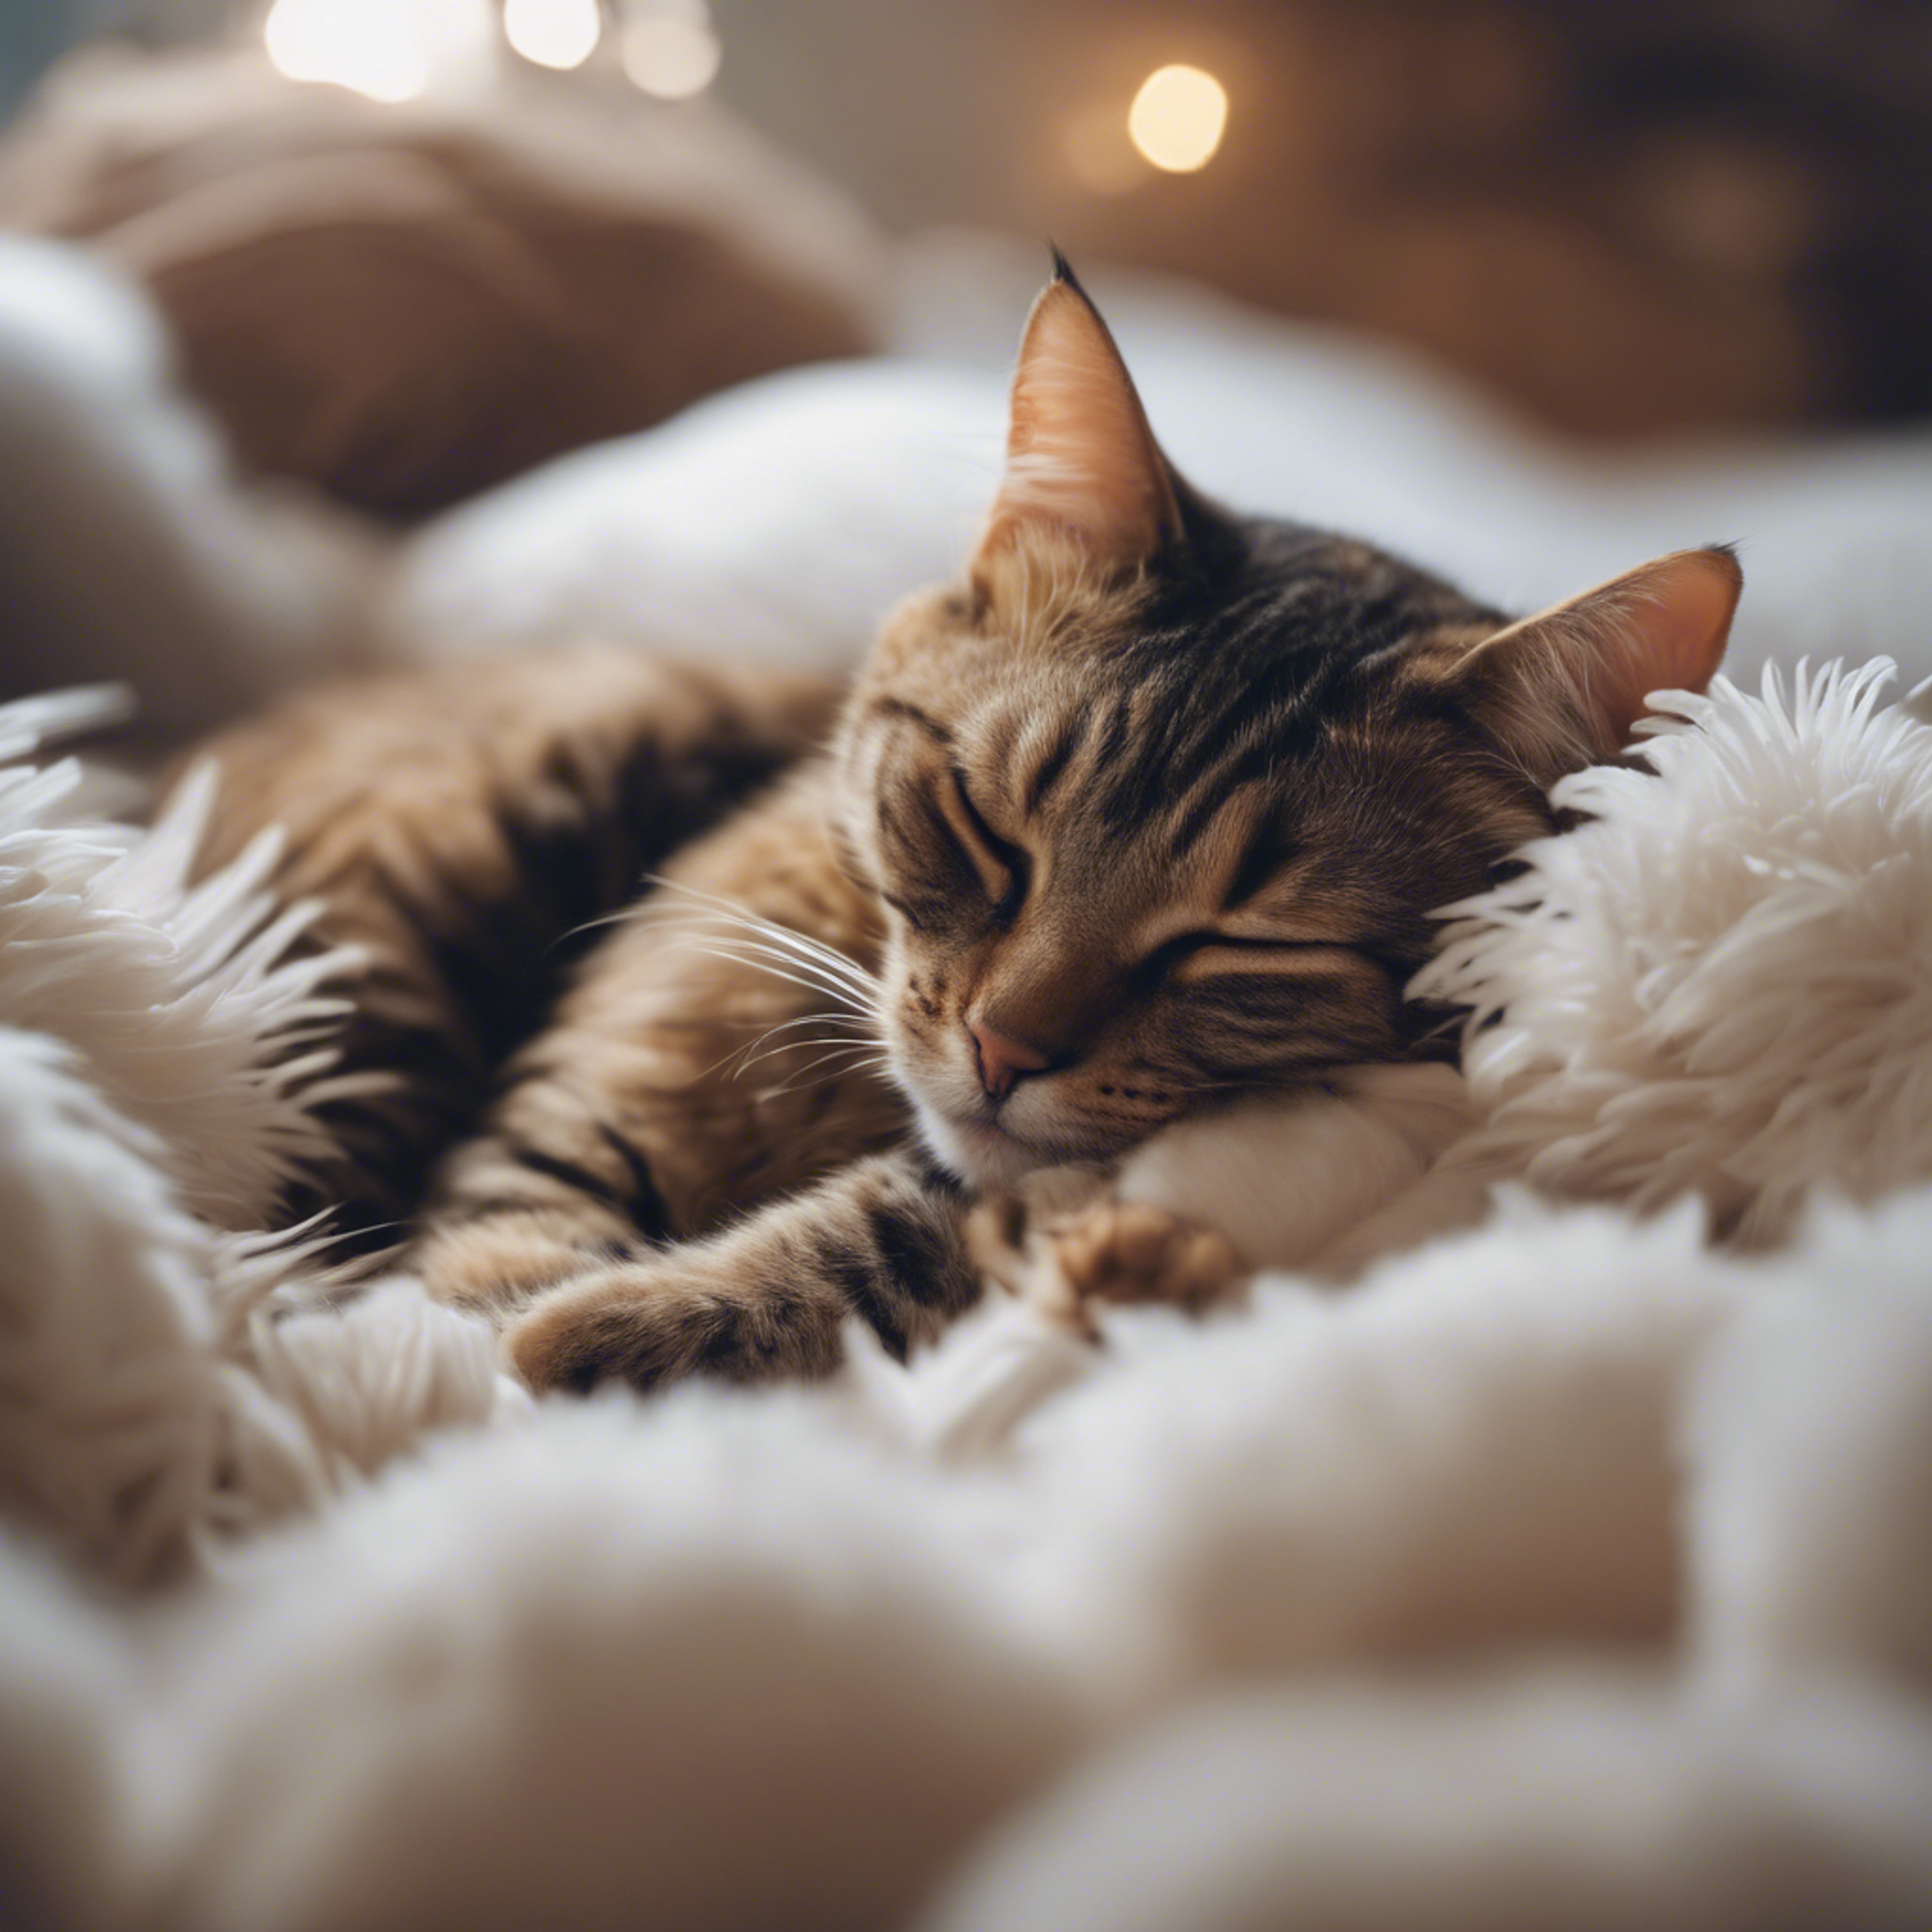 A cat sleeping soundly, completely submerged in a sea of cozy, fluffy pillows. Wallpaper[9e78fe4df88a4e90bb06]